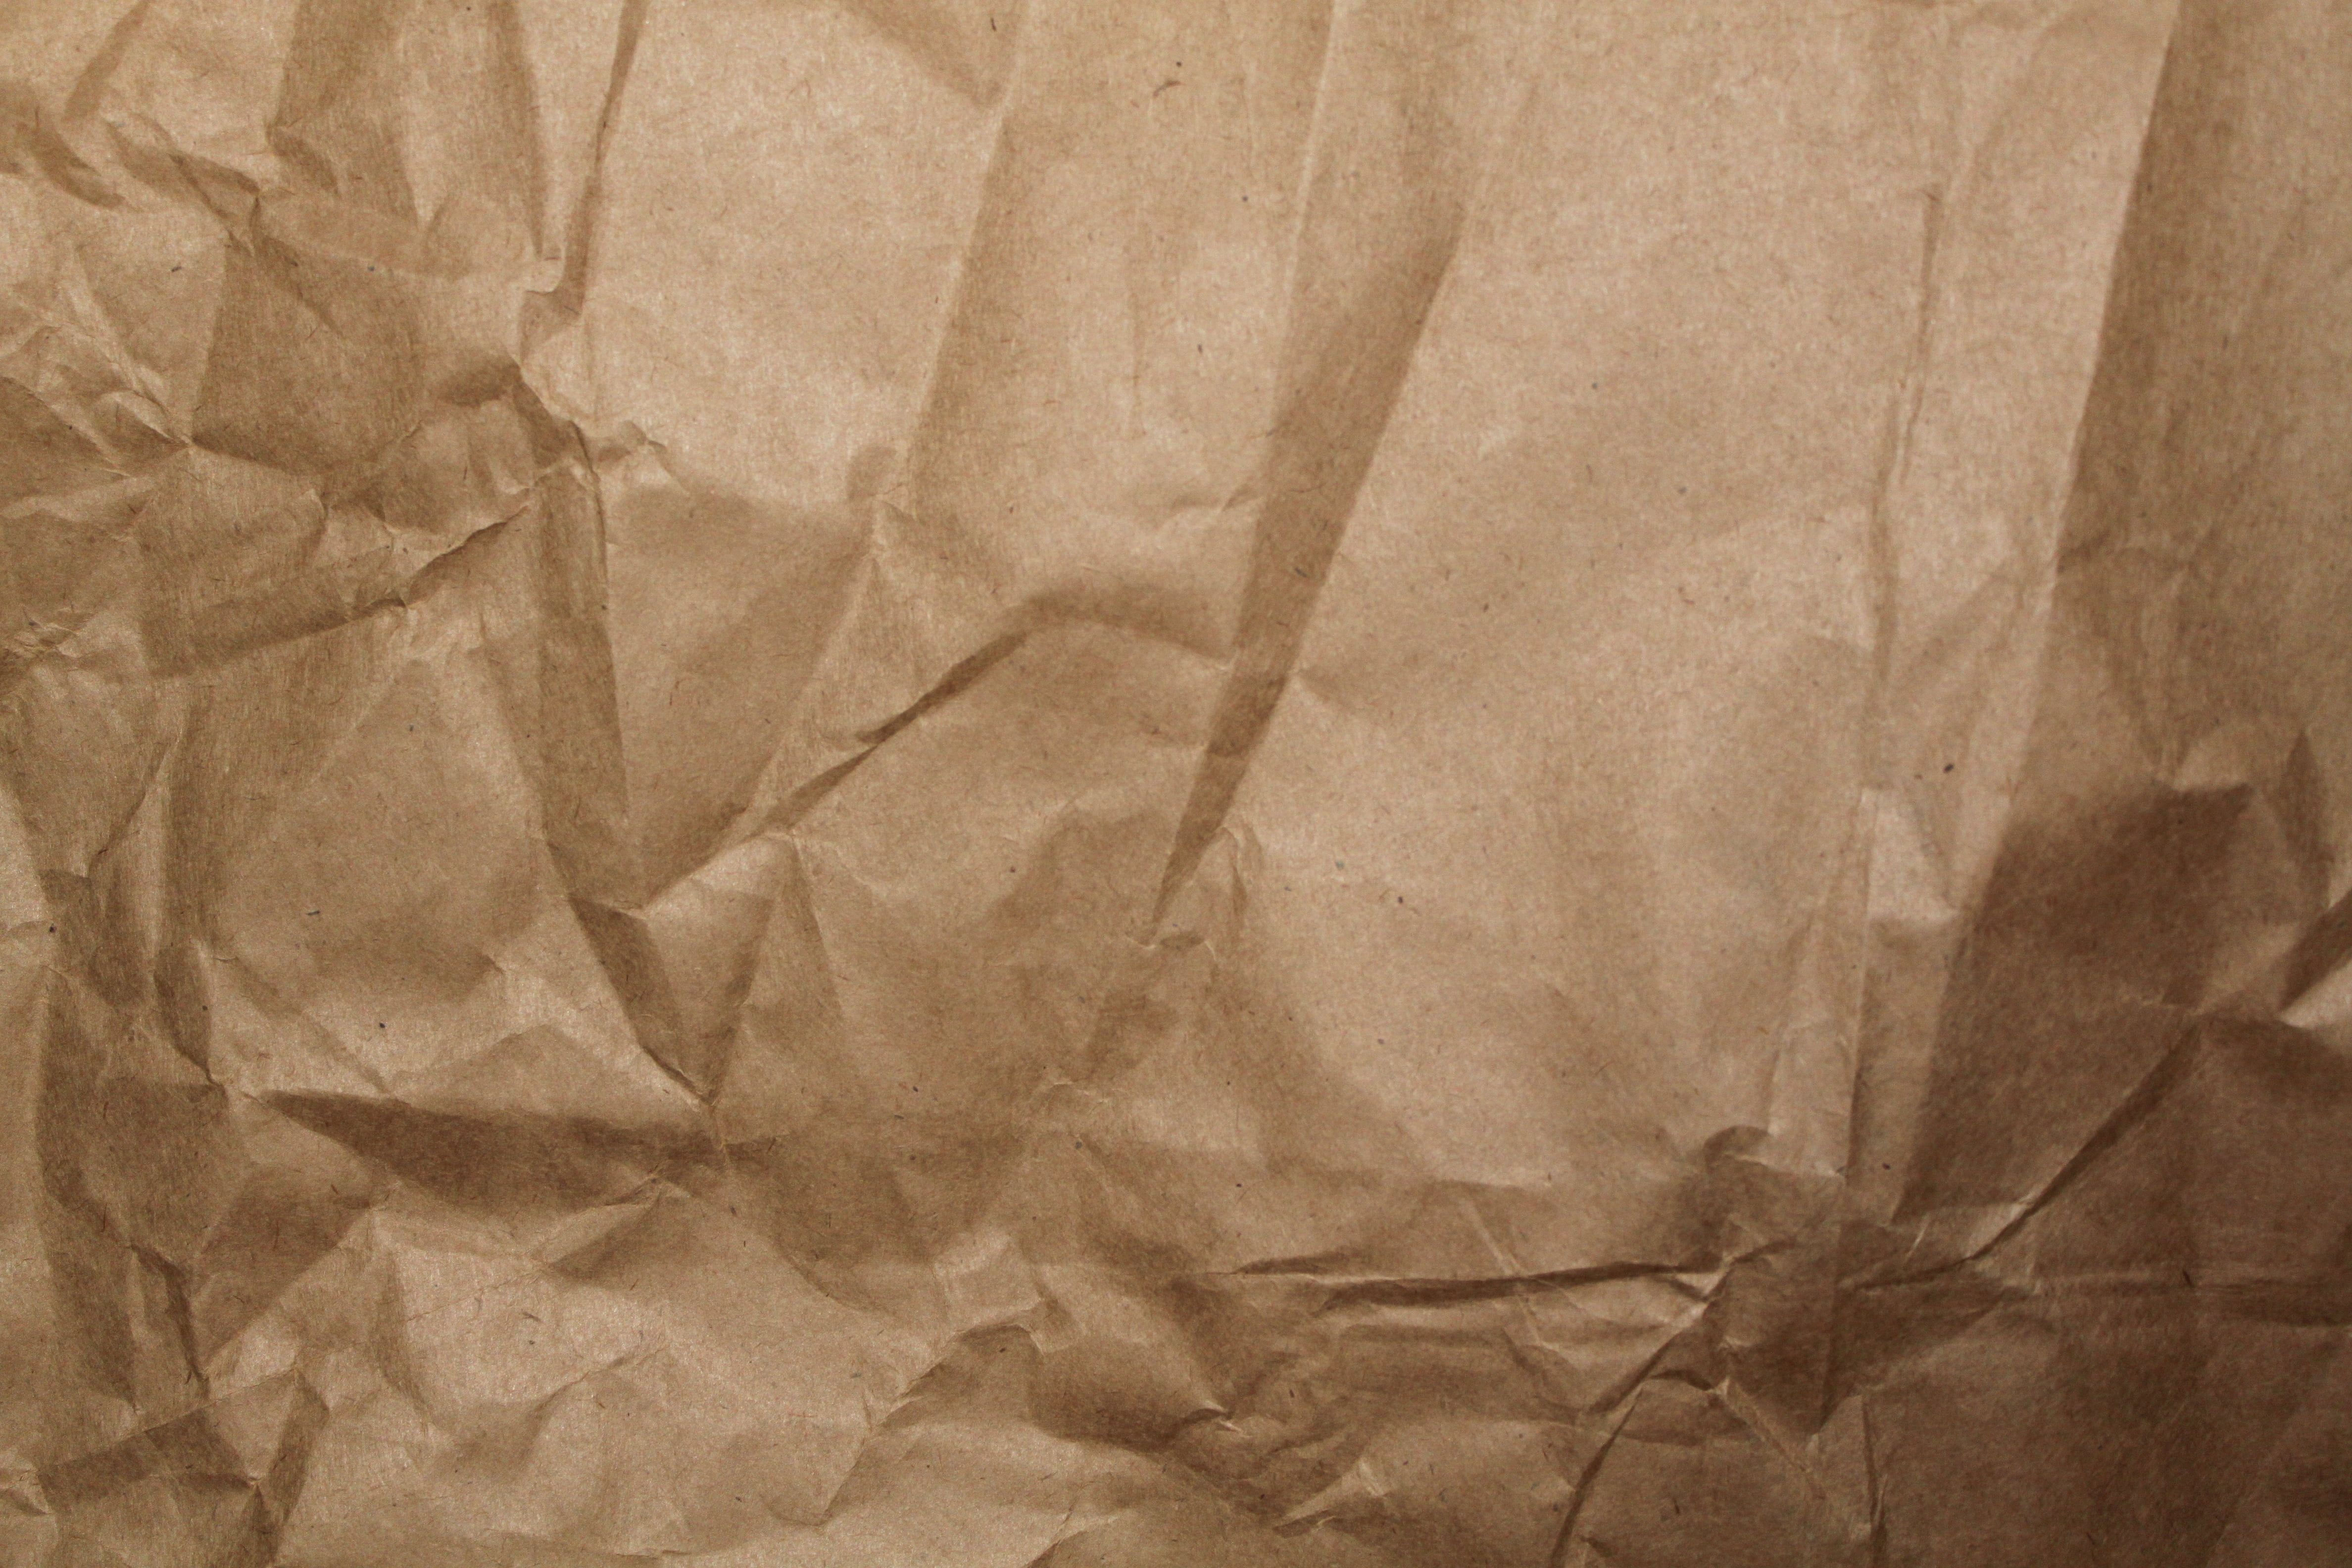 brown paper #paper #crumpled #background K #wallpaper #hdwallpaper #desktop. Brown paper textures, Brown paper texture background, Wrinkled paper